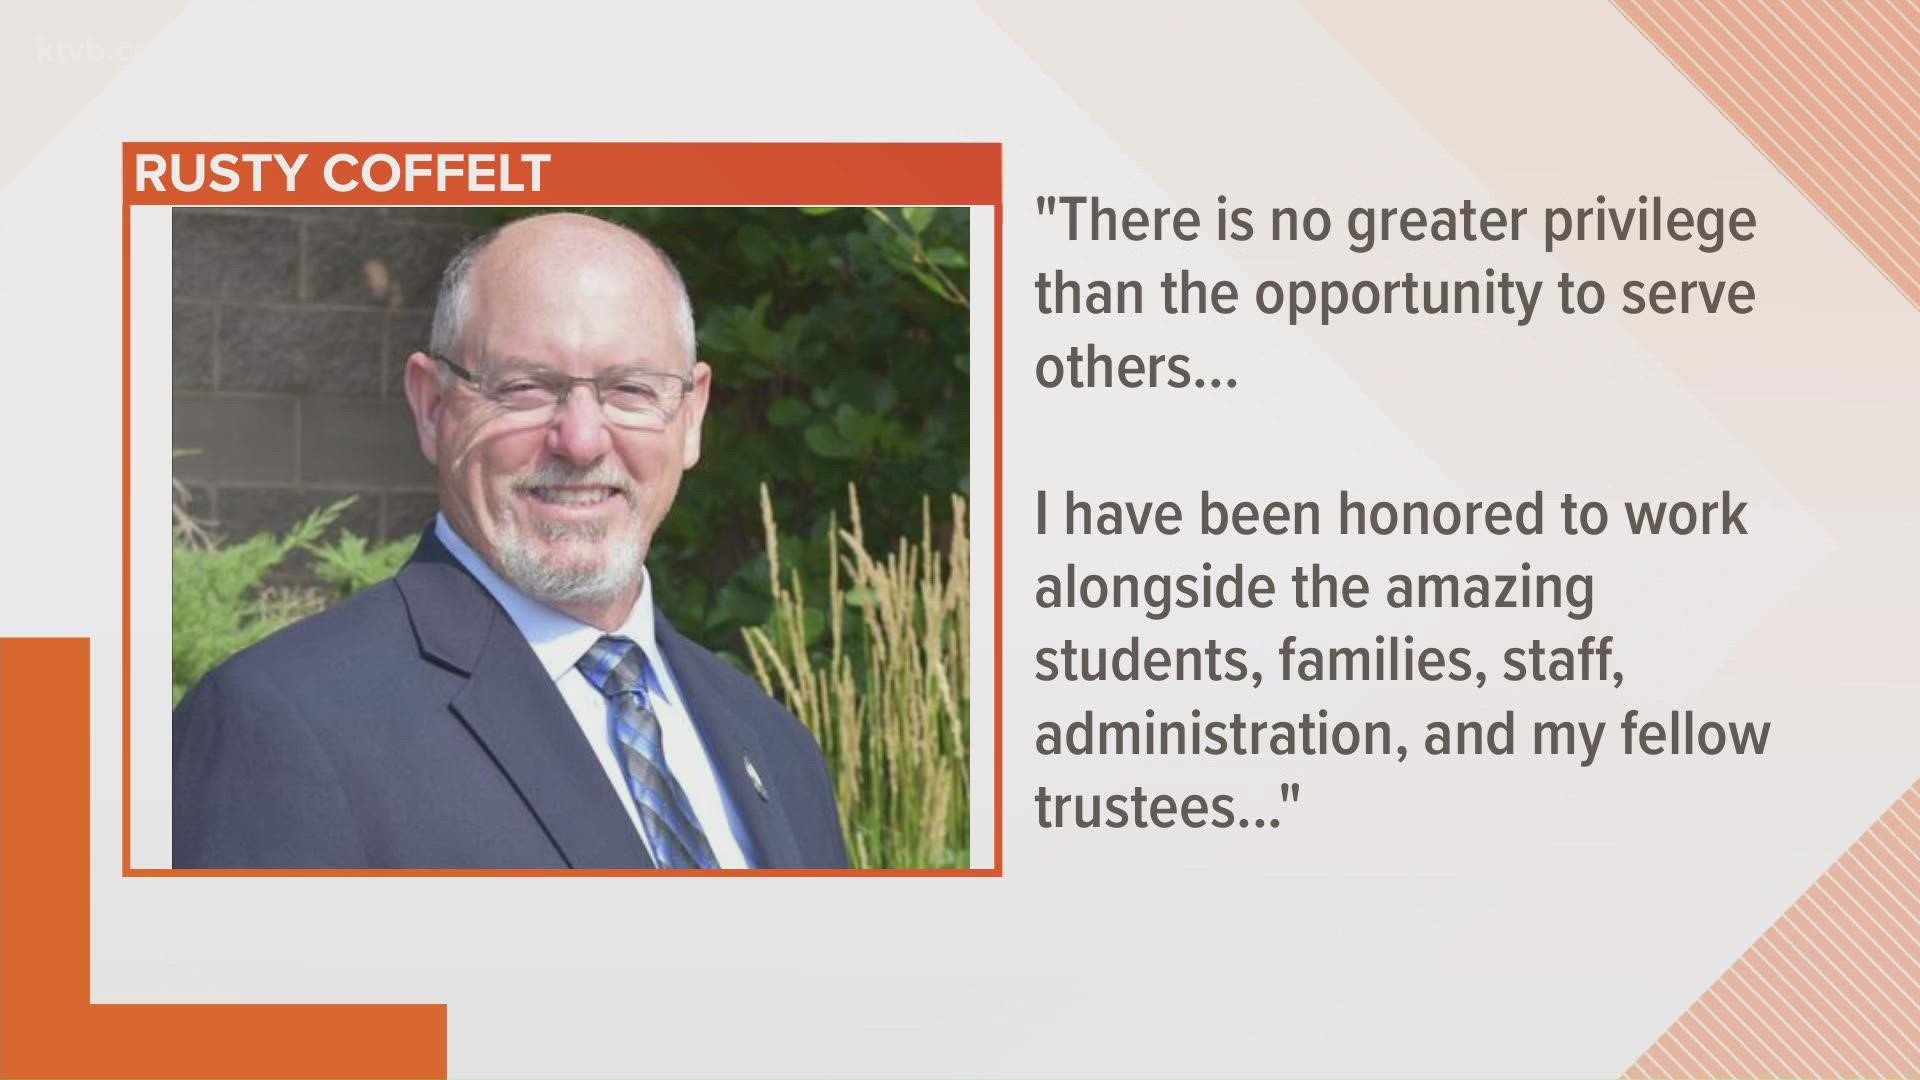 Rusty Coffelt wrote in a letter to the superintendent that he was stepping down to attend to "personal family matters."